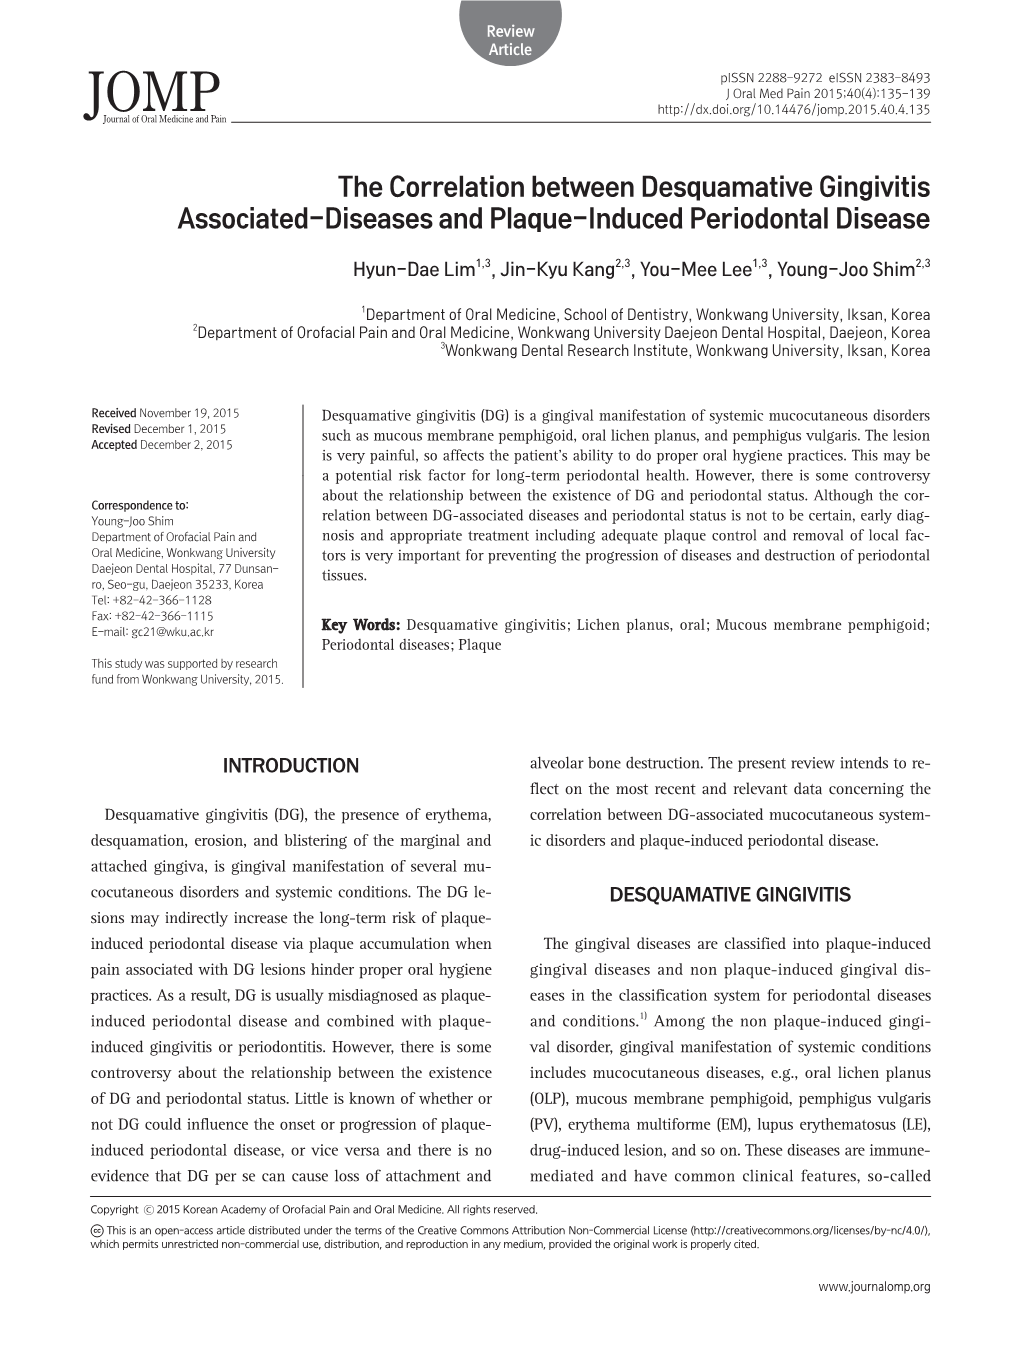 The Correlation Between Desquamative Gingivitis Associated-Diseases and Plaque-Induced Periodontal Disease